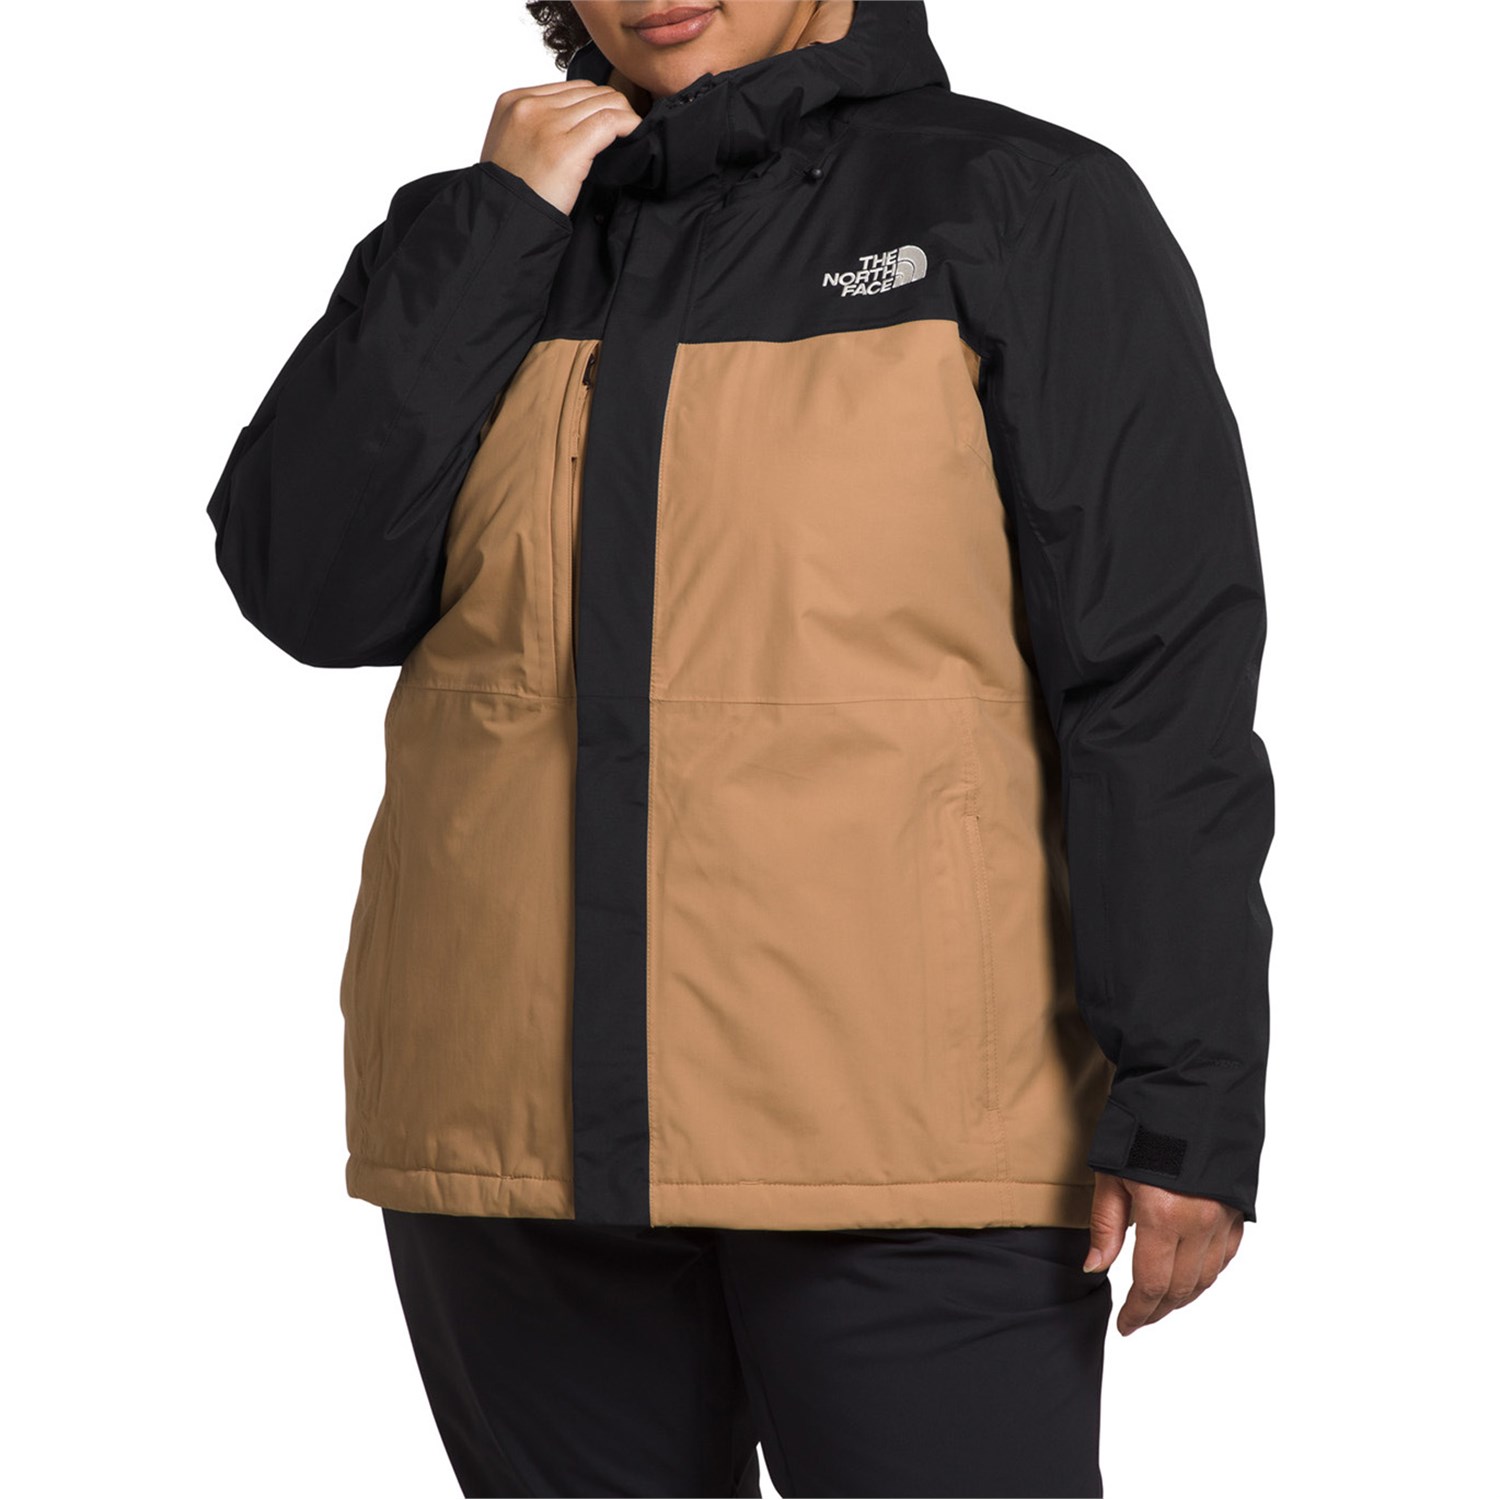 Куртка The North Face Freedom Insulated Plus, цвет TNF Black/Almond Butter куртка the north face insulated красно коричневый